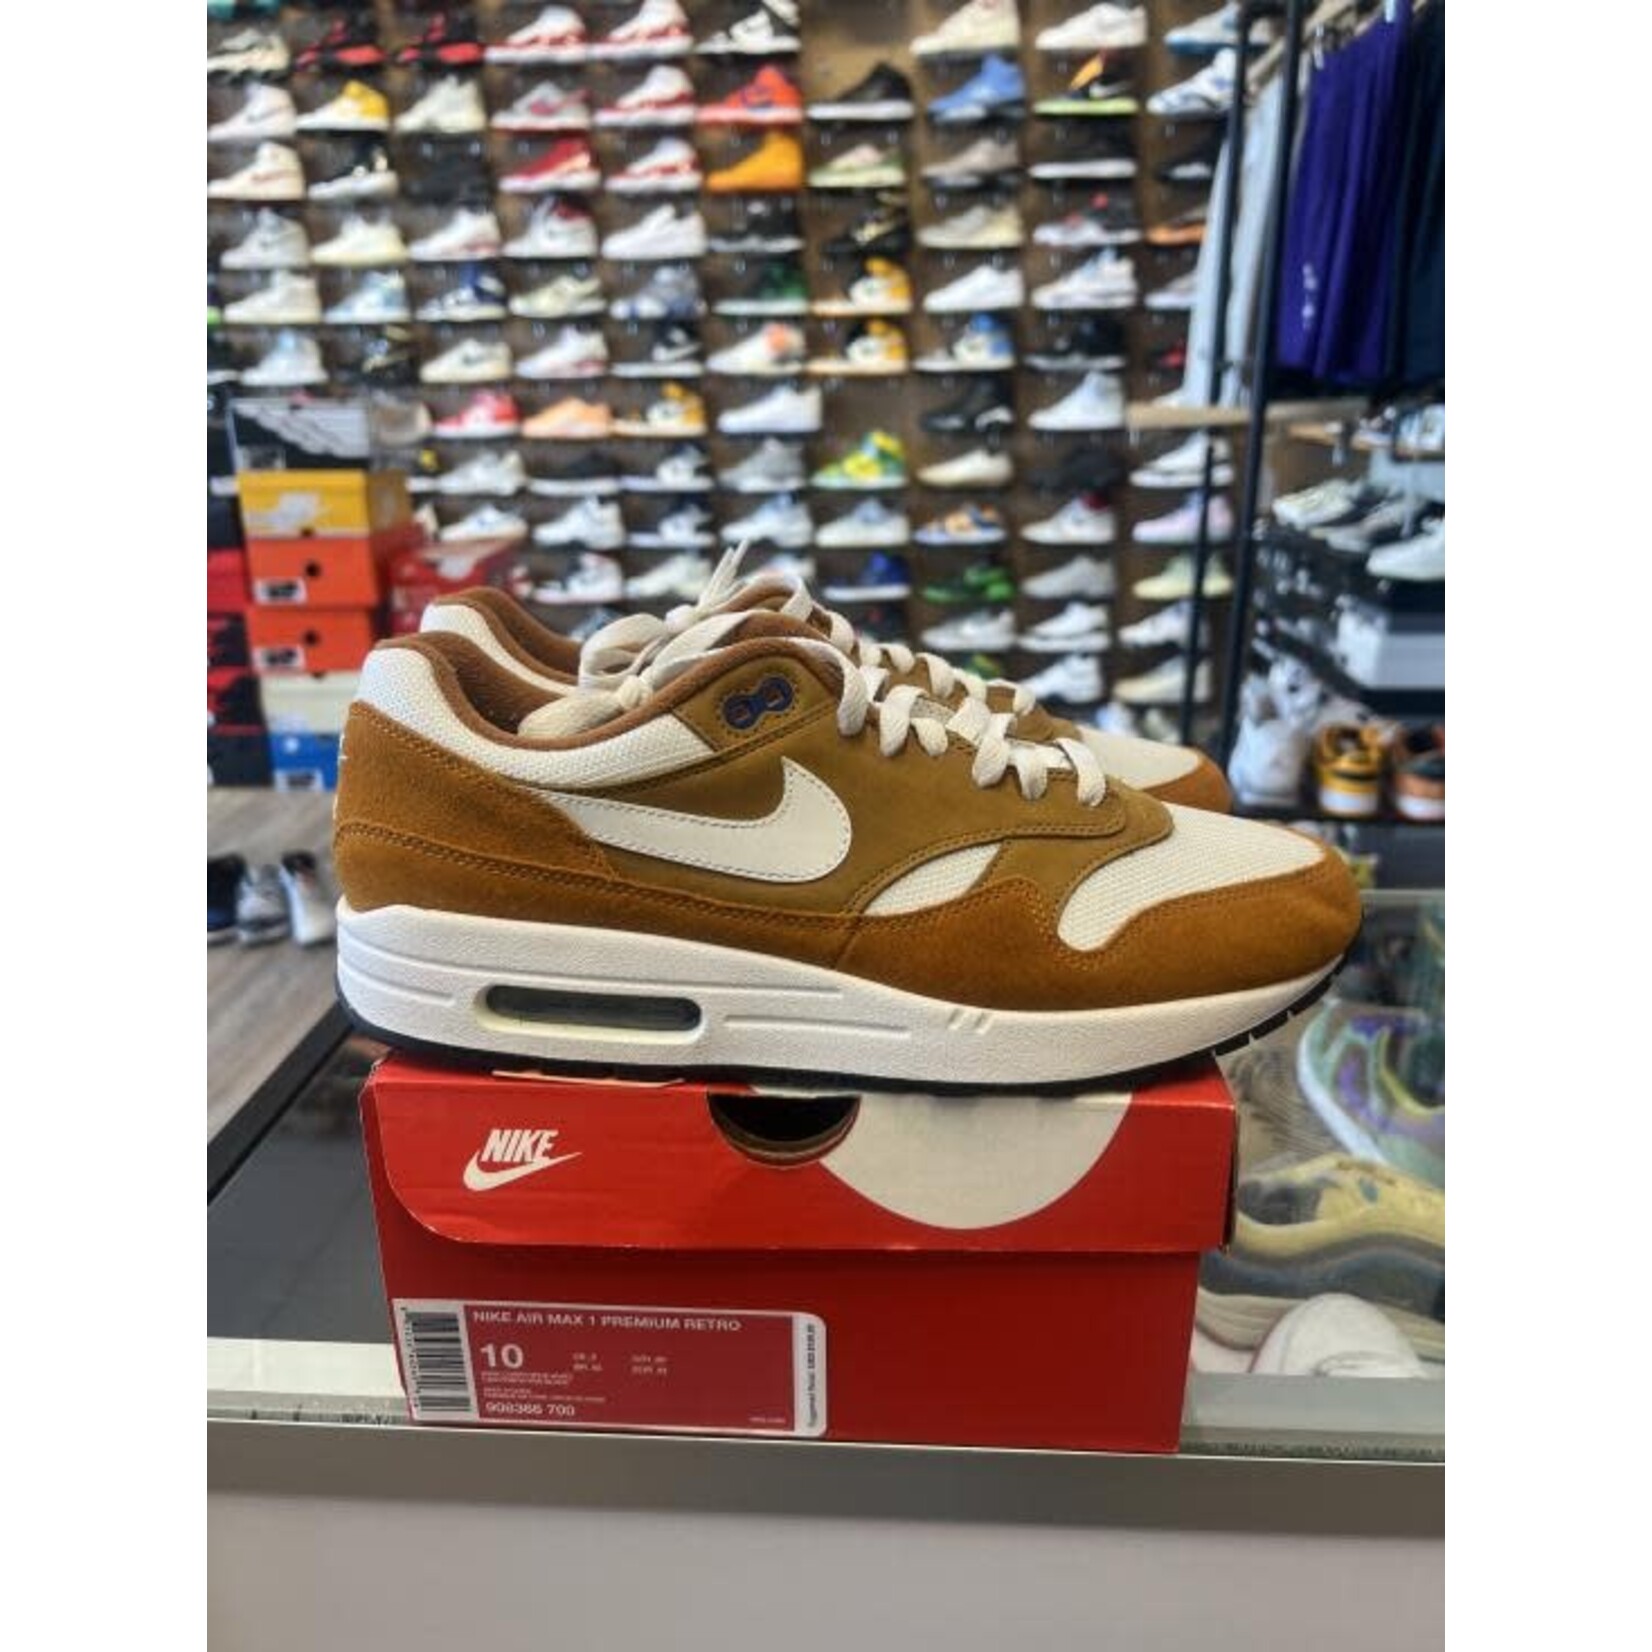 recinto vagón actividad Nike Nike Air Max 1 Curry (2018) Size 10, PREOWNED - SoleSeattle